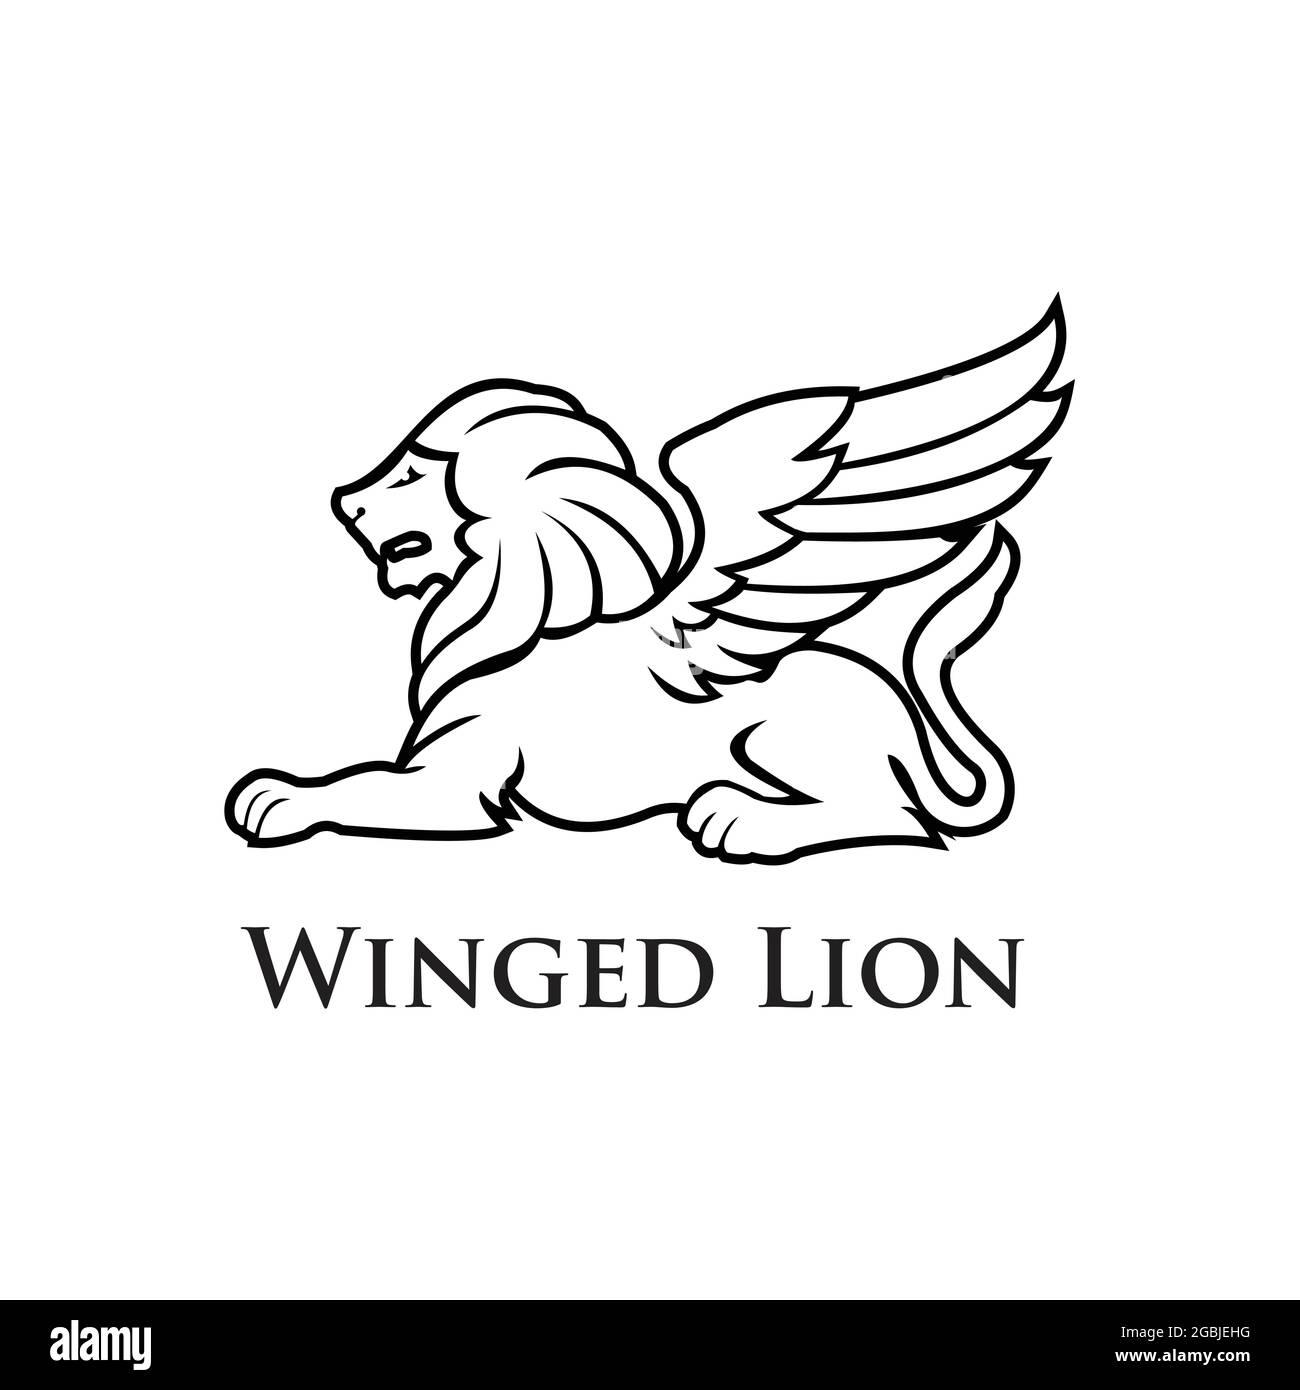 winged lion flat black with black background logo exclusive design inspiration Stock Vector